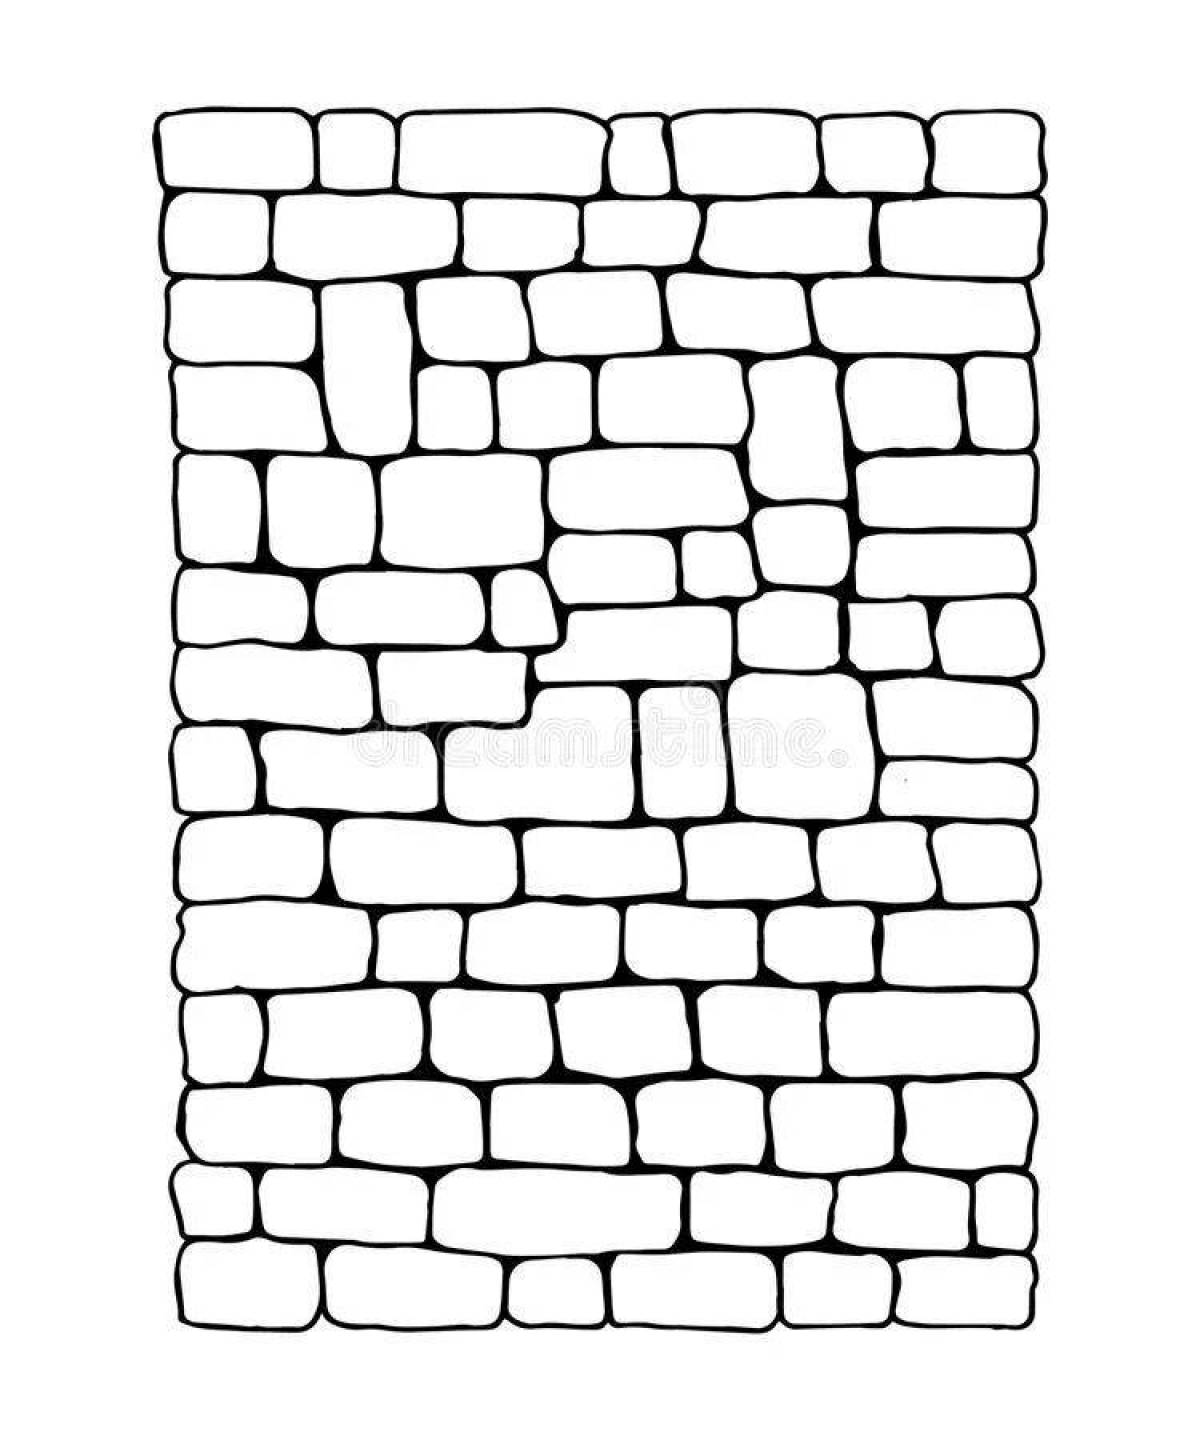 Colored veined brick wall coloring book